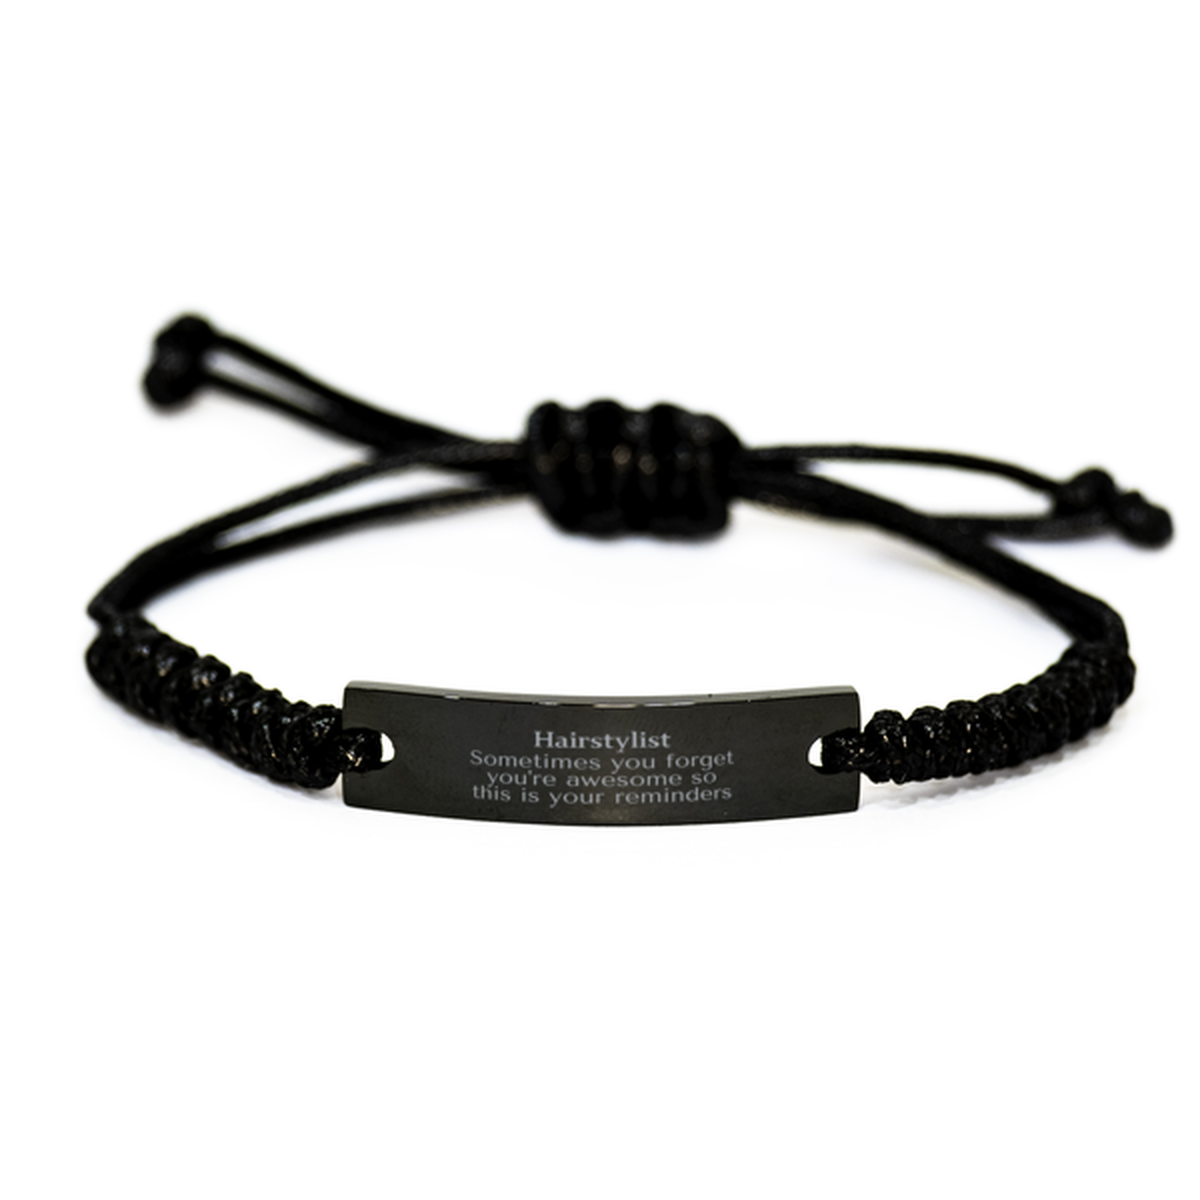 Sentimental Hairstylist Black Rope Bracelet, Hairstylist Sometimes you forget you're awesome so this is your reminders, Graduation Christmas Birthday Gifts for Hairstylist, Men, Women, Coworkers